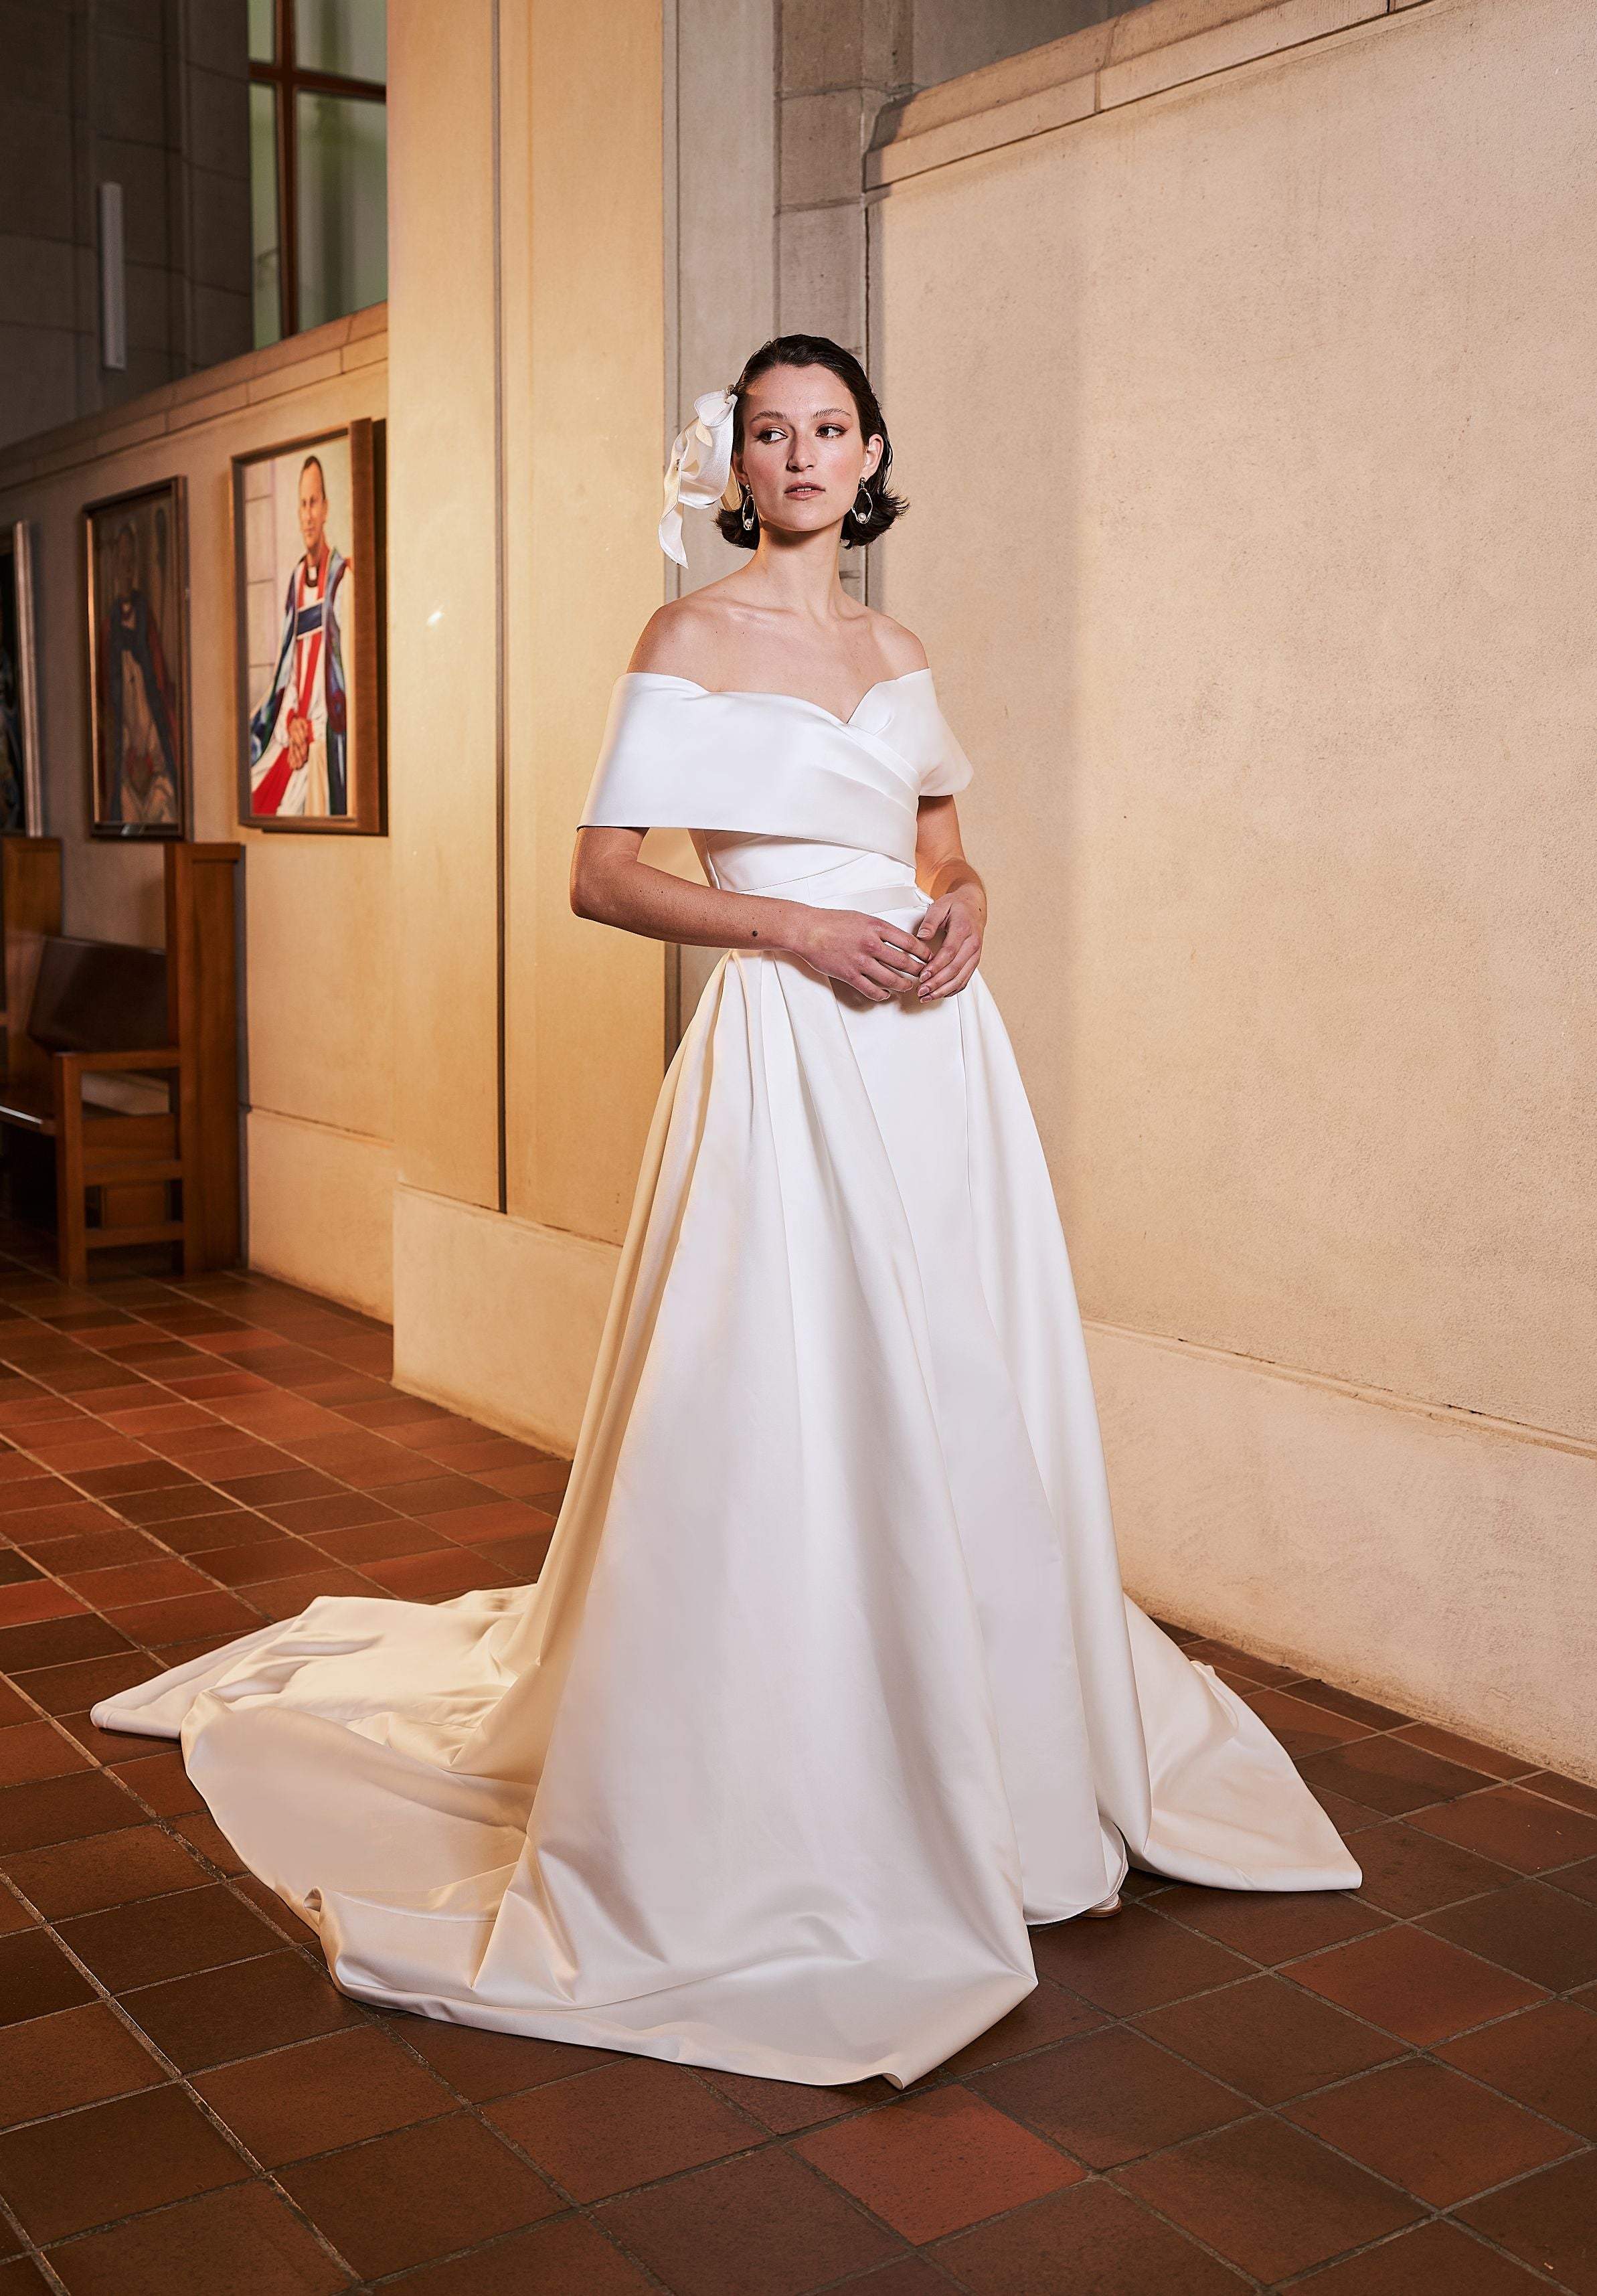 Serenity overskirt is attached to serenity wedding gown. Minimal aesthetic in ivory sating, this detachable overskirt joins at the waist creating a voluminous train